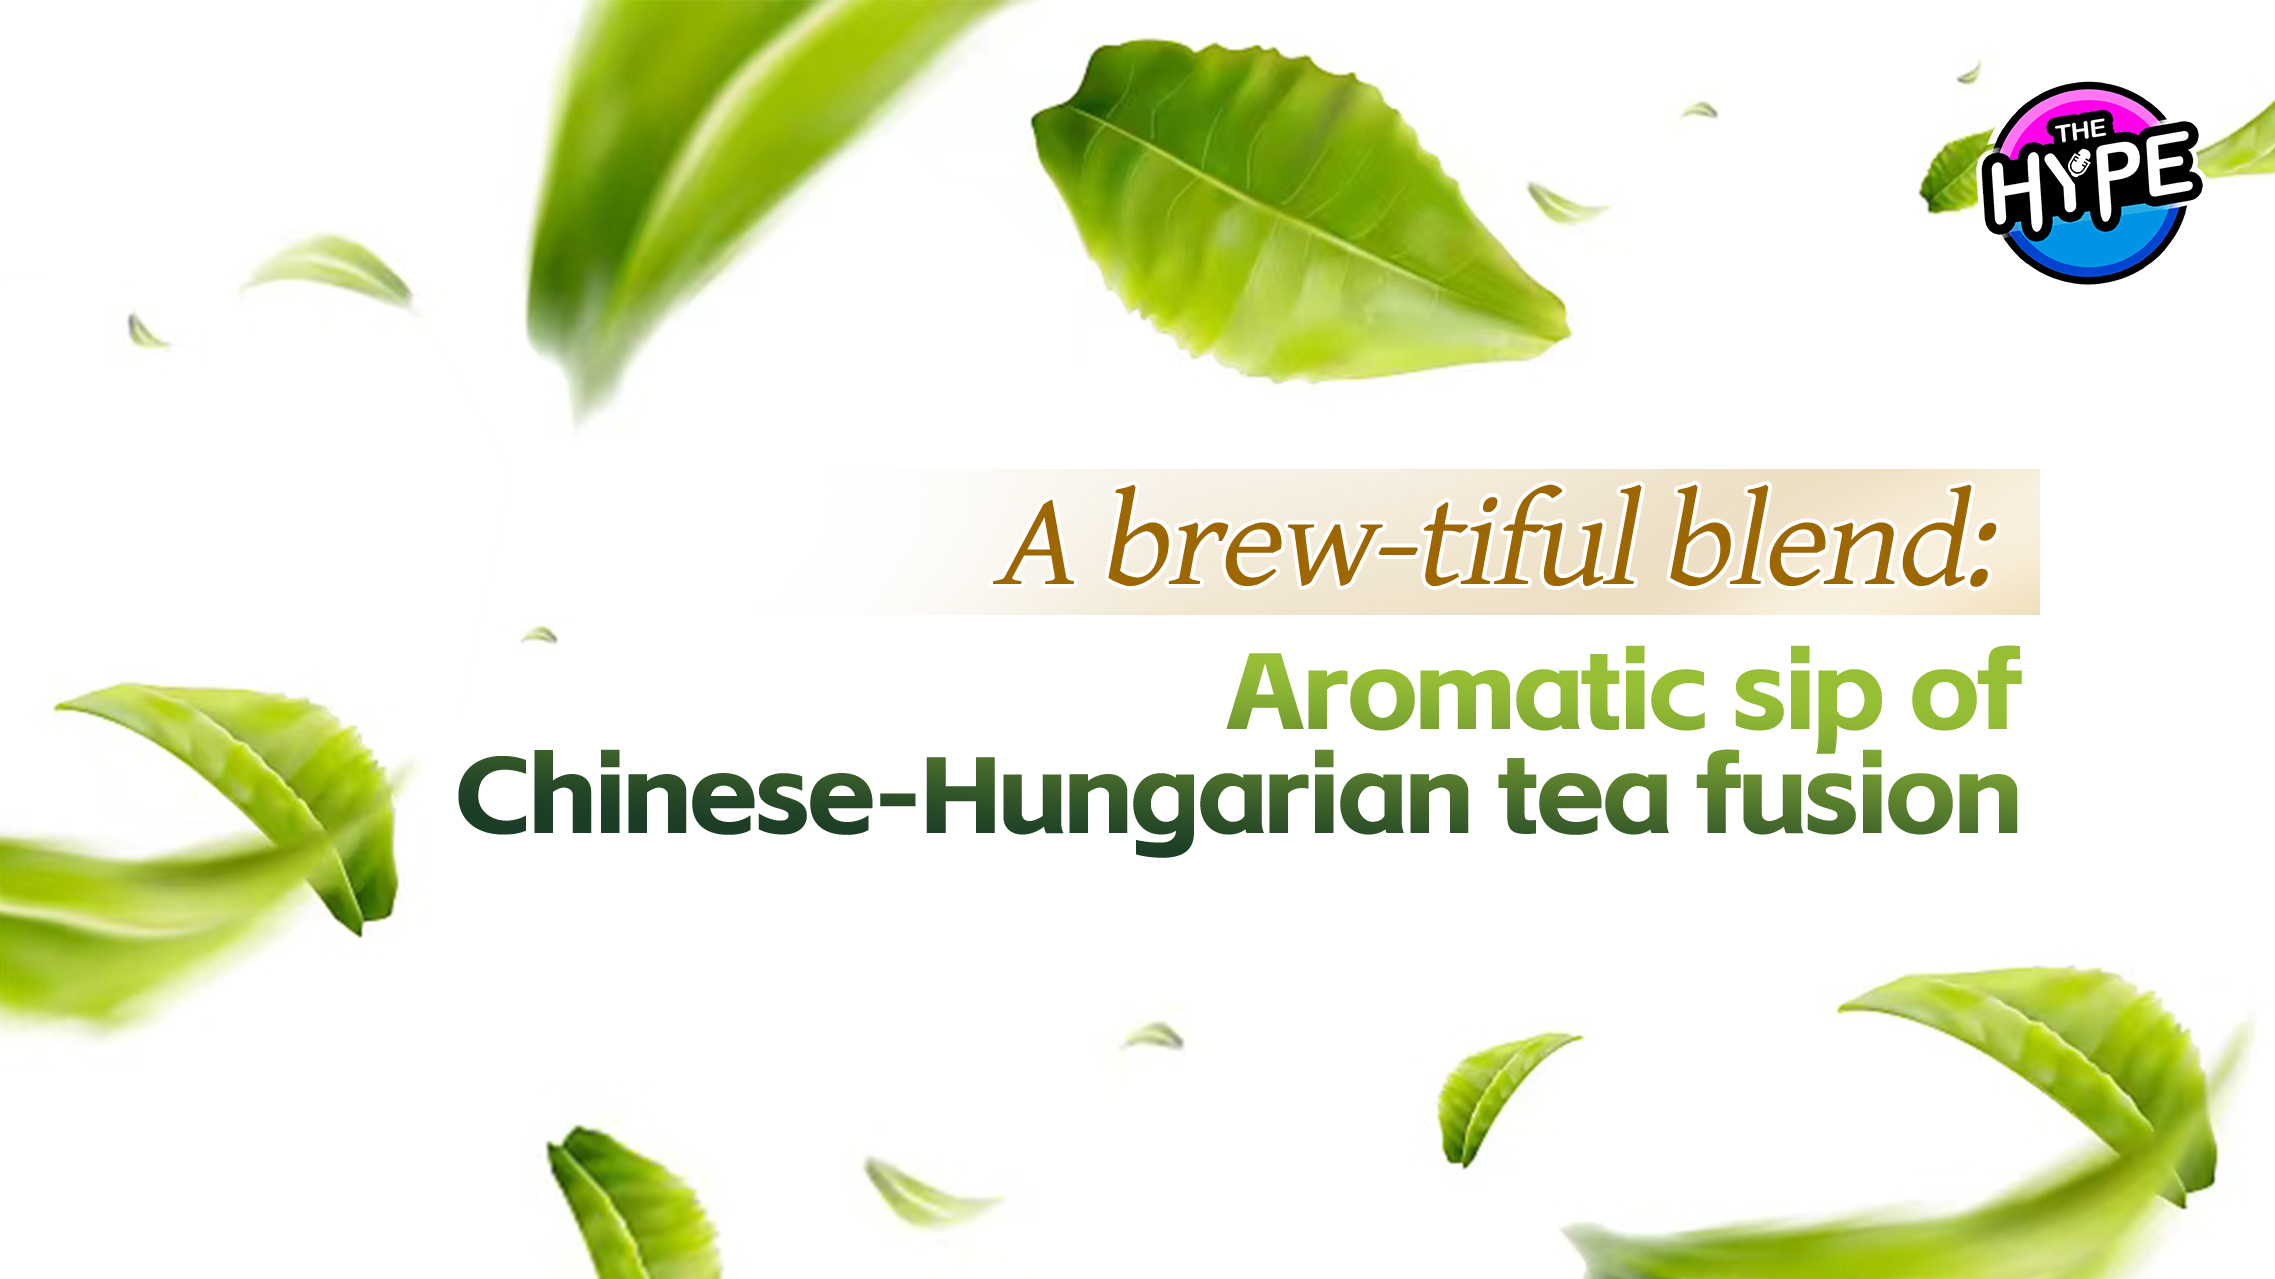 Watch: THE HYPE – Aromatic sip of Chinese-Hungarian tea fusion